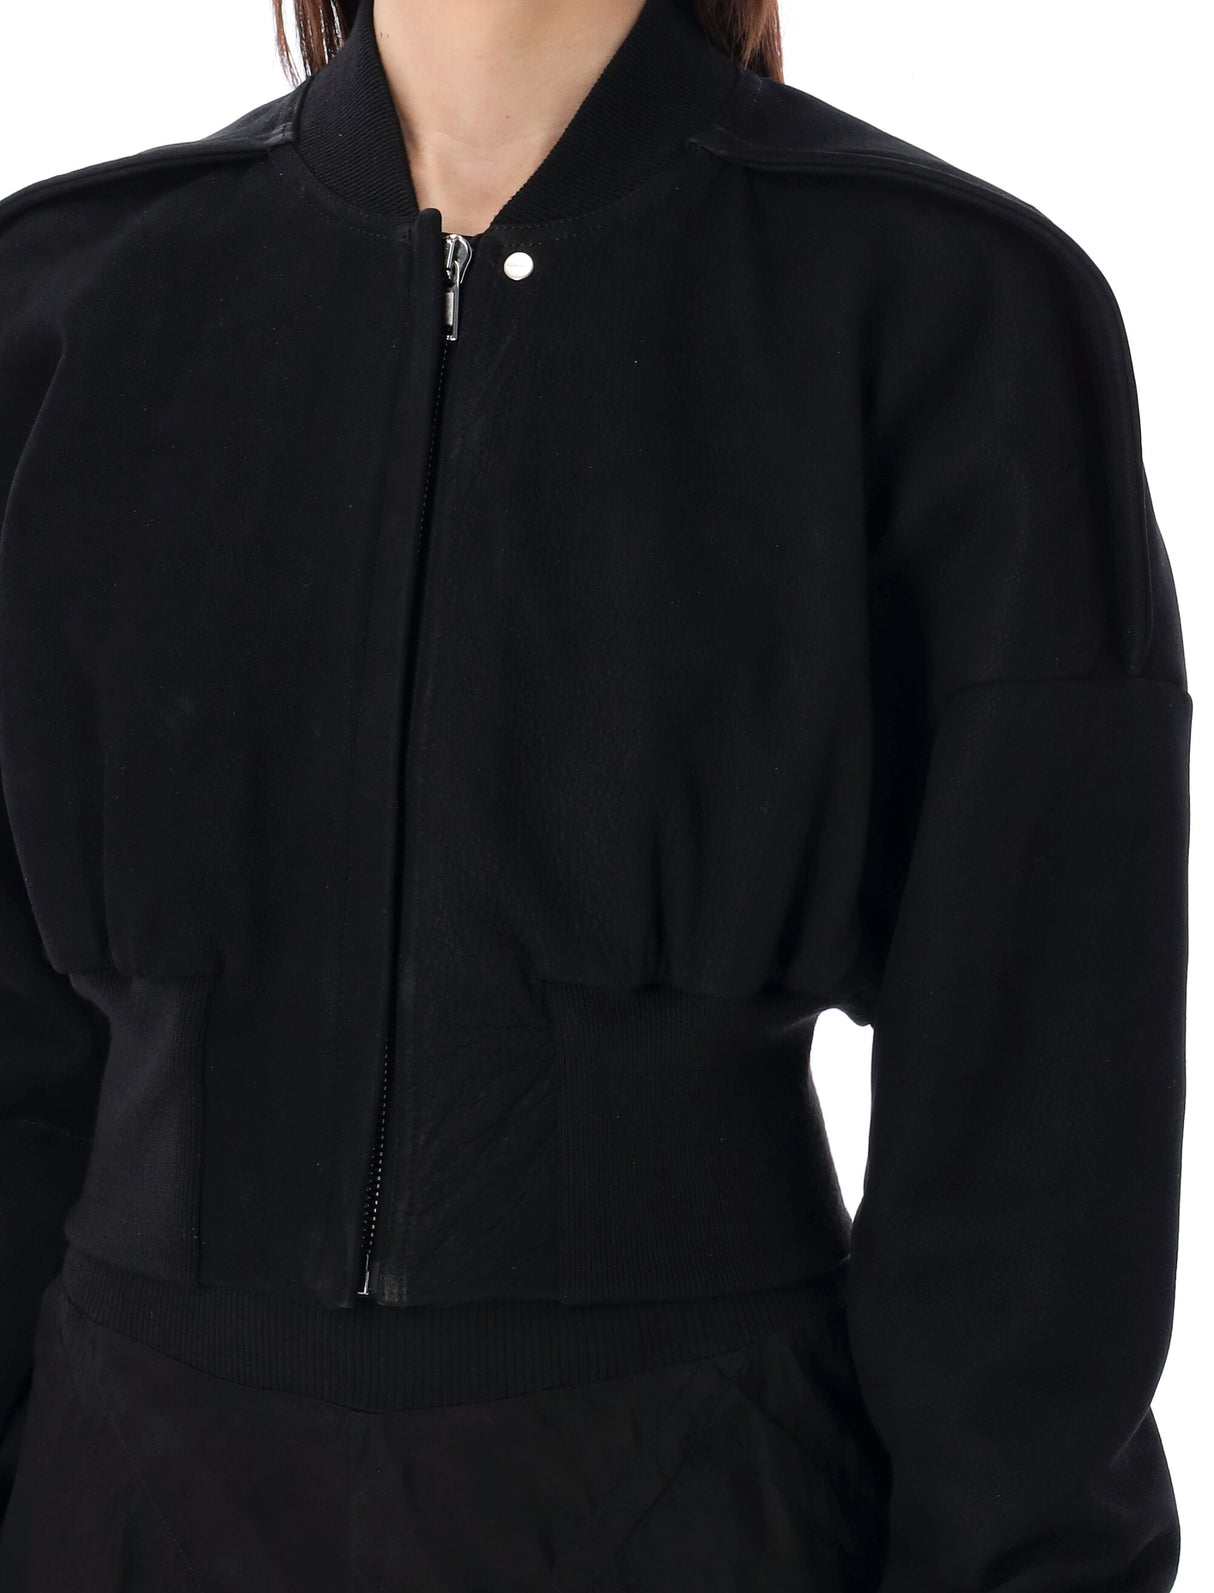 RICK OWENS Women's Black Cropped Leather Jacket with Zip Fastening, Ribbed Collar and Cuffs - SS24